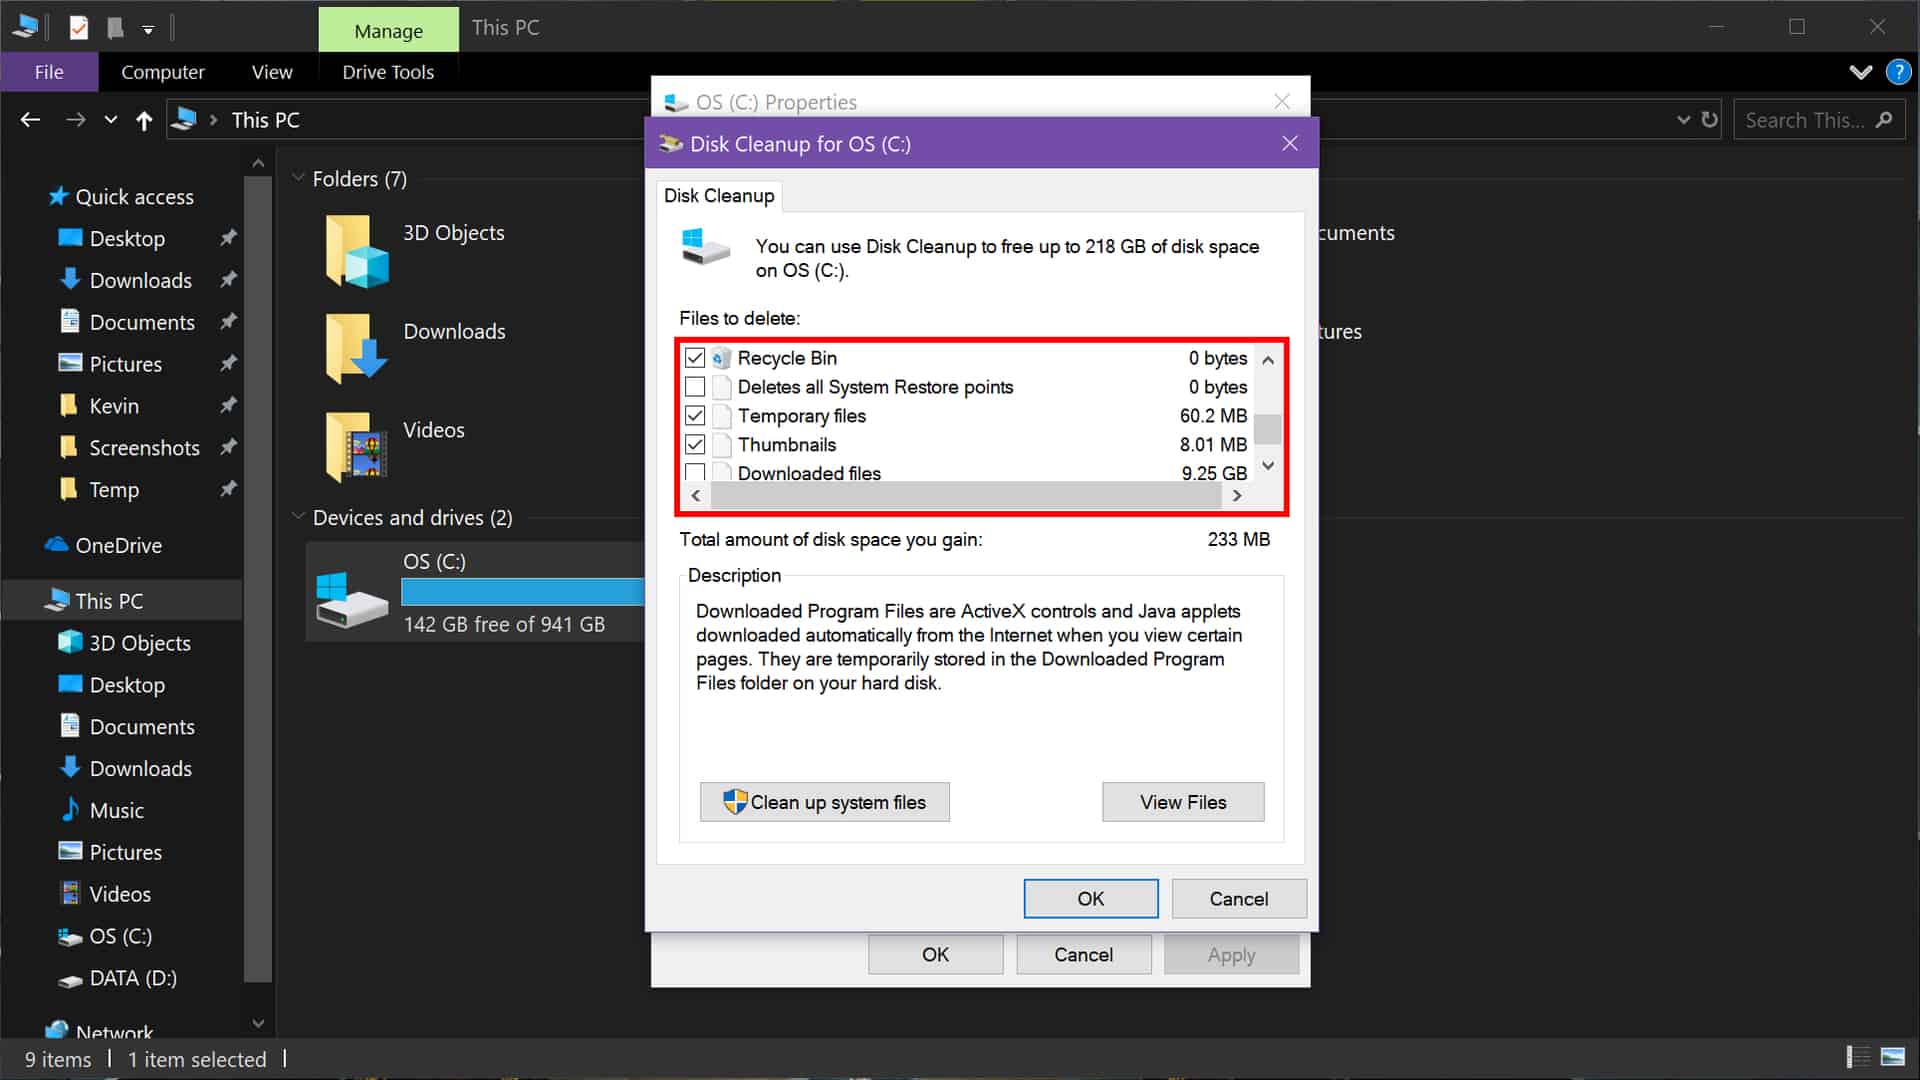 Windows 10 Disk Cleanup options